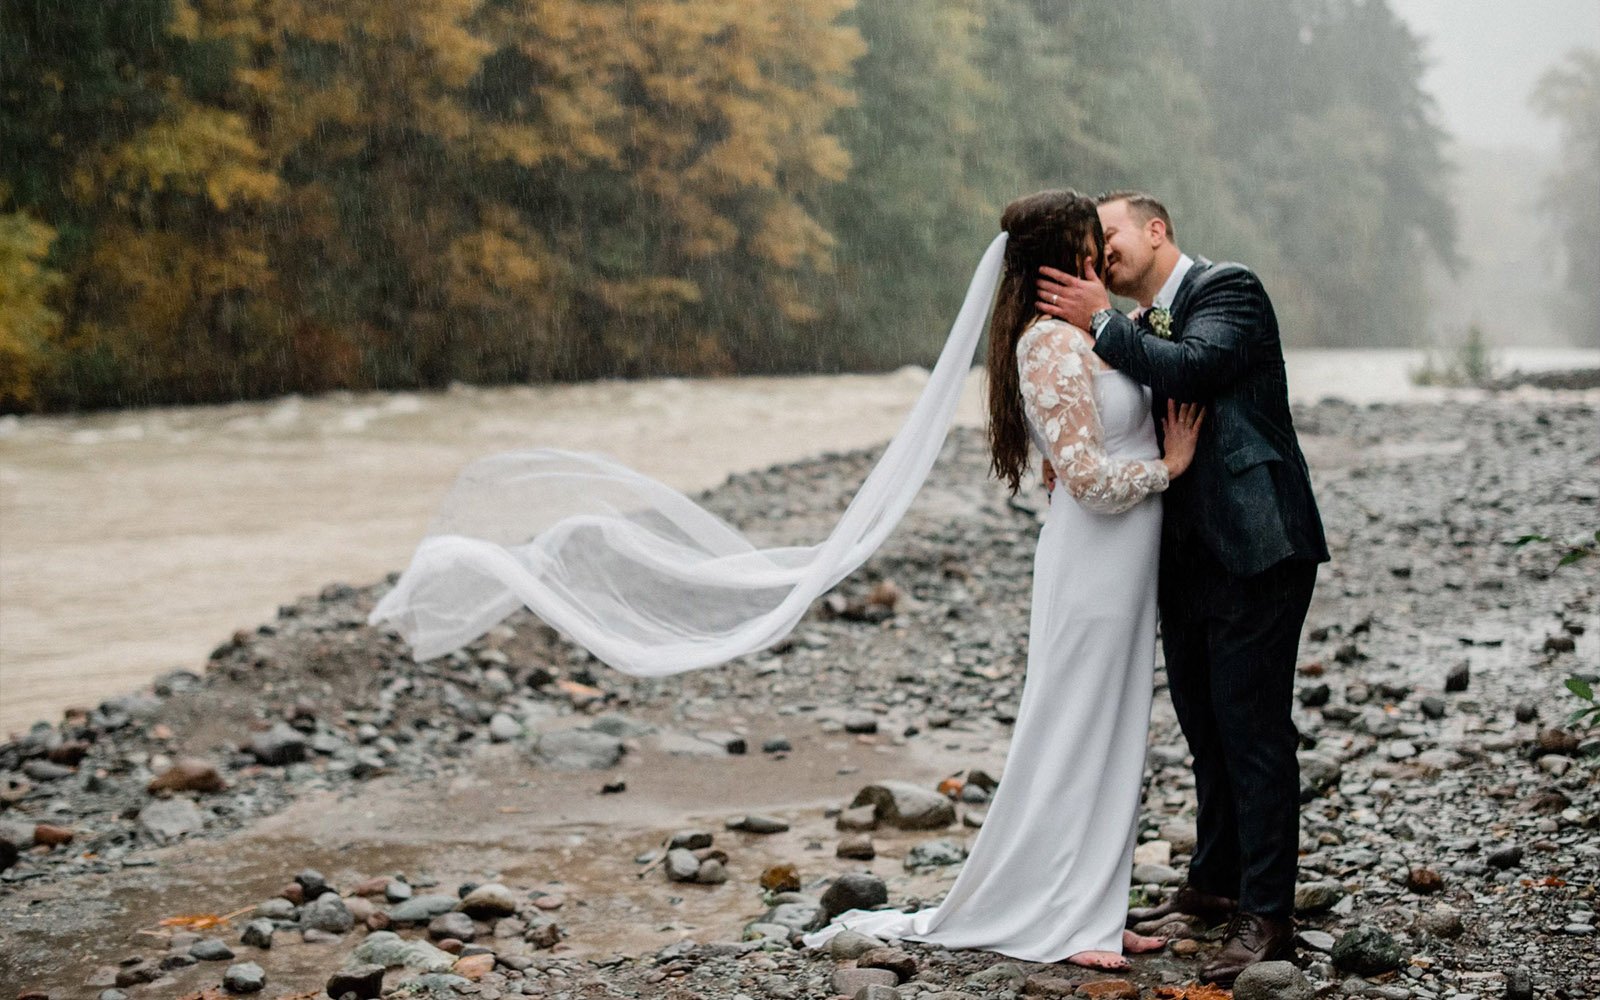 https://ruffledroseveils.com/wp-content/uploads/2023/04/Ruffled-Rose-Veils-Ottawa-Canadian-handmade-bridal-veils-bride-in-modern-lace-and-minimalist-dress-kissing-new-husband-in-the-rain-on-a-rocky-beach-with-veil-flowing-out-behind-her.jpg